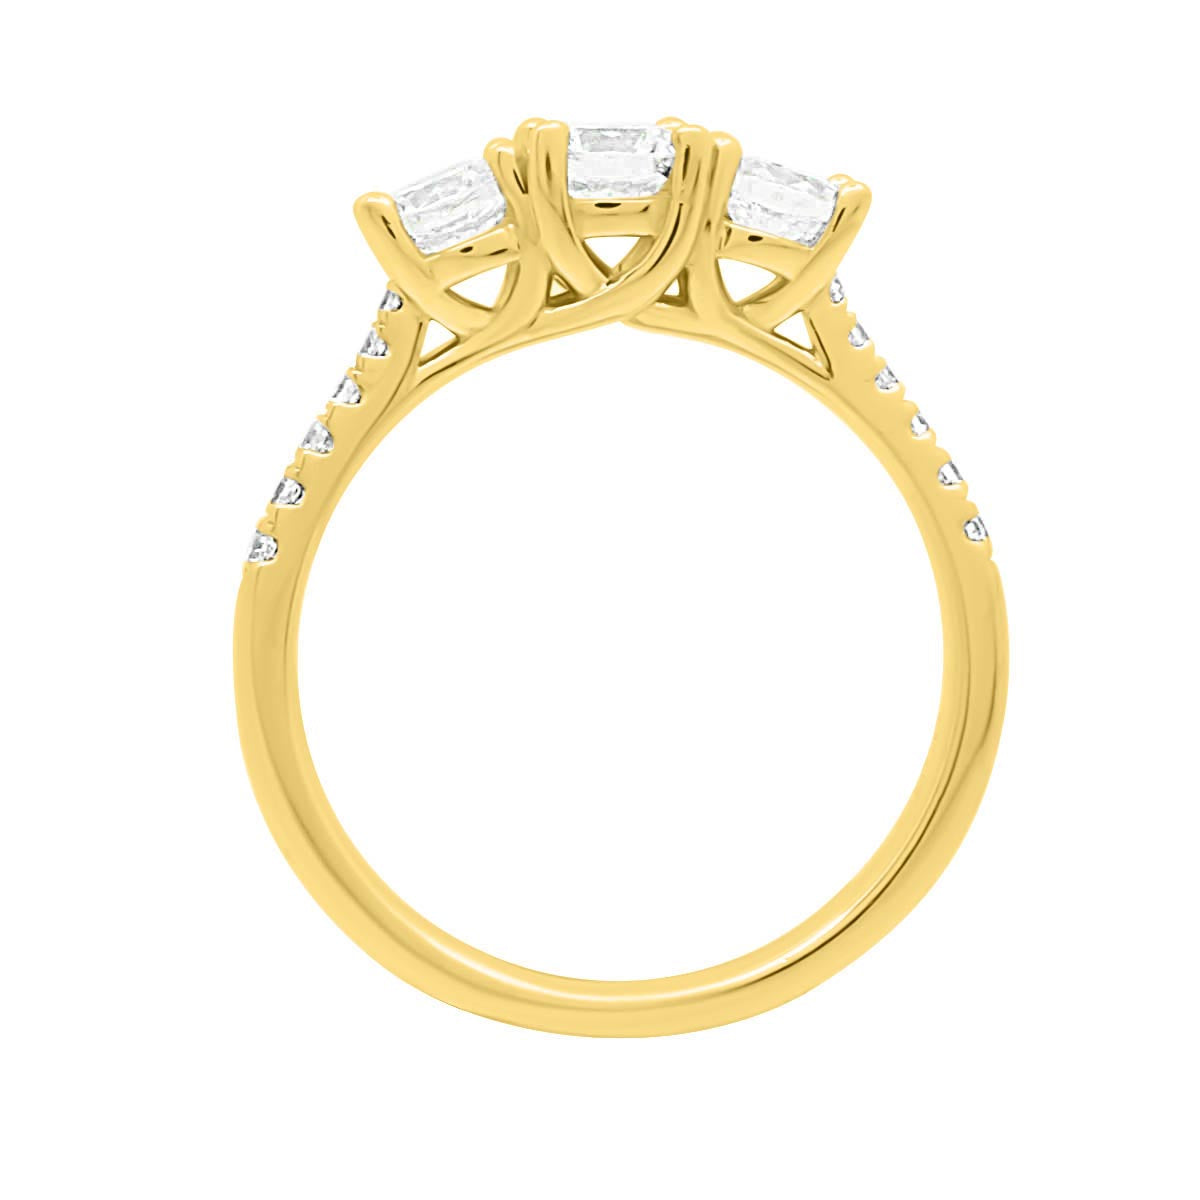 3 Stone Engagement Ring in yellow gold in upright position